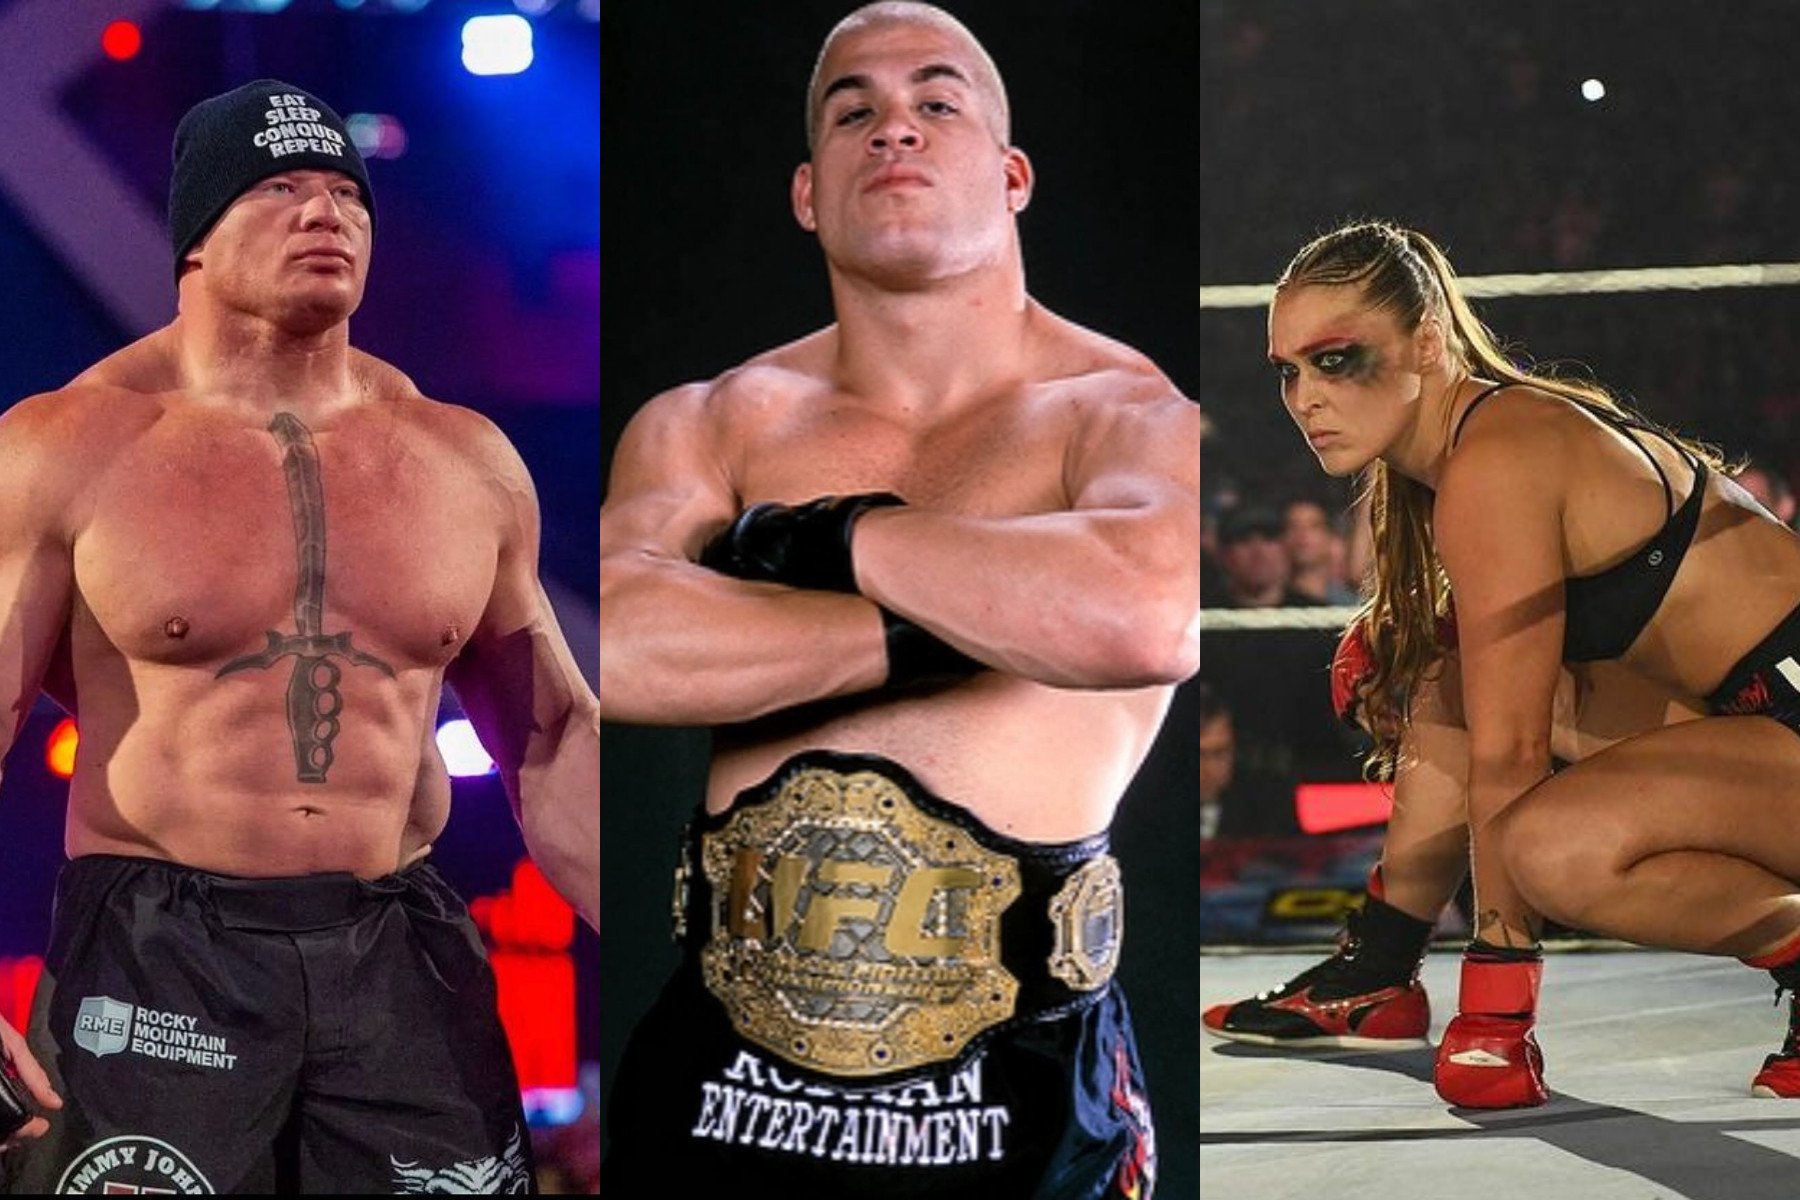 Brock Lesnar, Jacob “Tito” Ortiz and Ronda Rousey are three of the richest MMA fighters in the world – but who is the richest of them all? Photos: @brock._.lesnar, @jaytsandals and @titoortizig, @rondarousey/Instagram